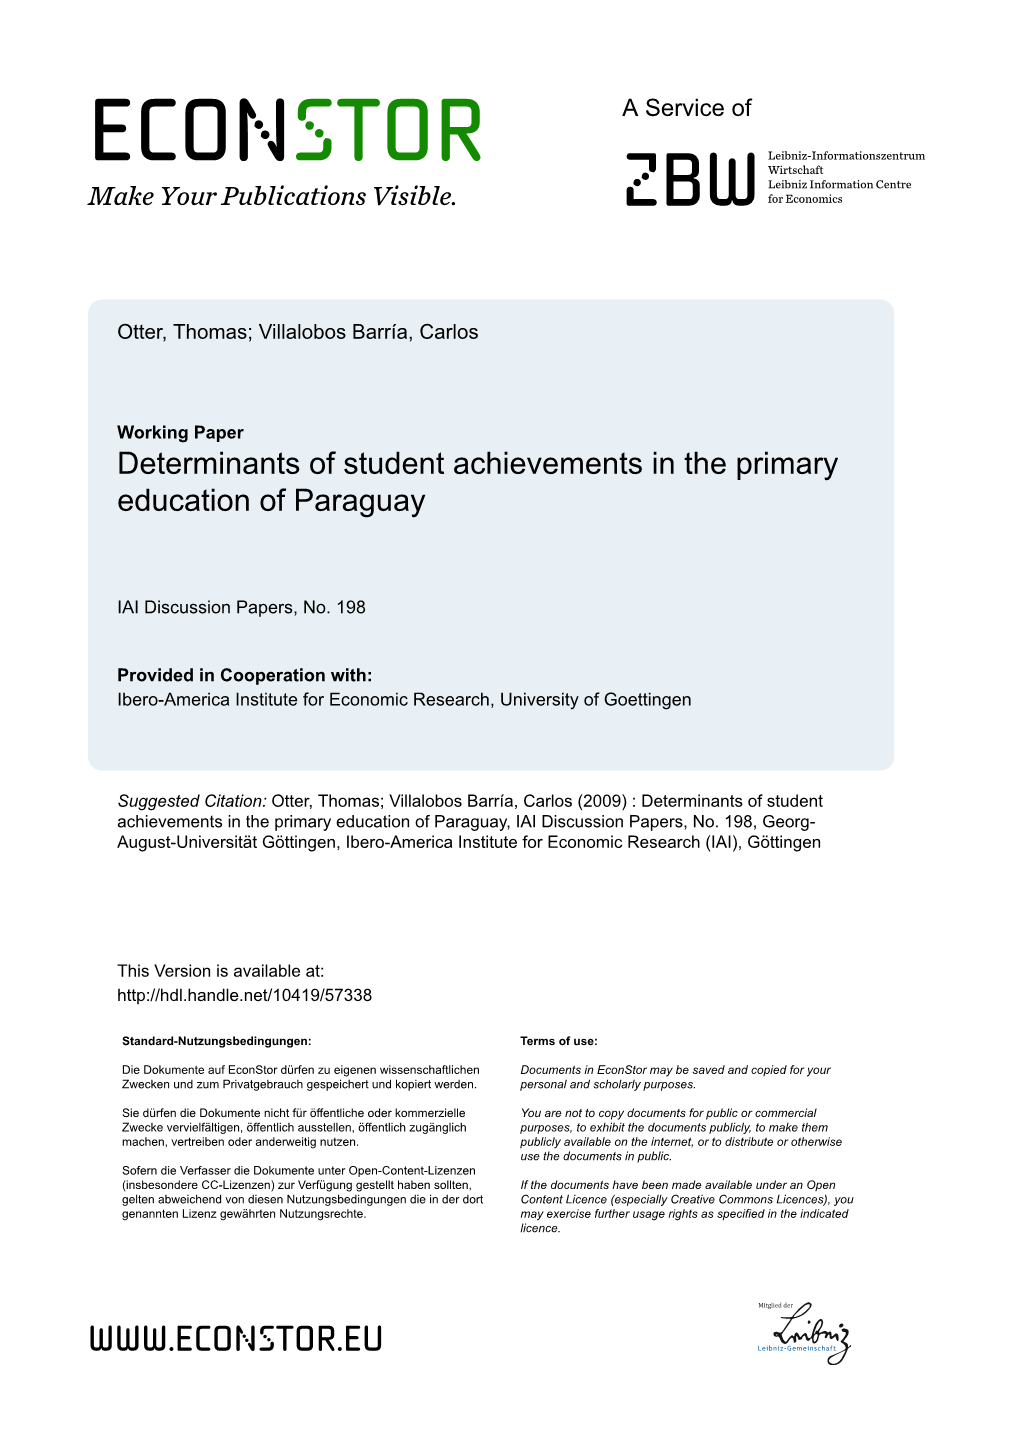 Determinants of Student Achievements in the Primary Education of Paraguay